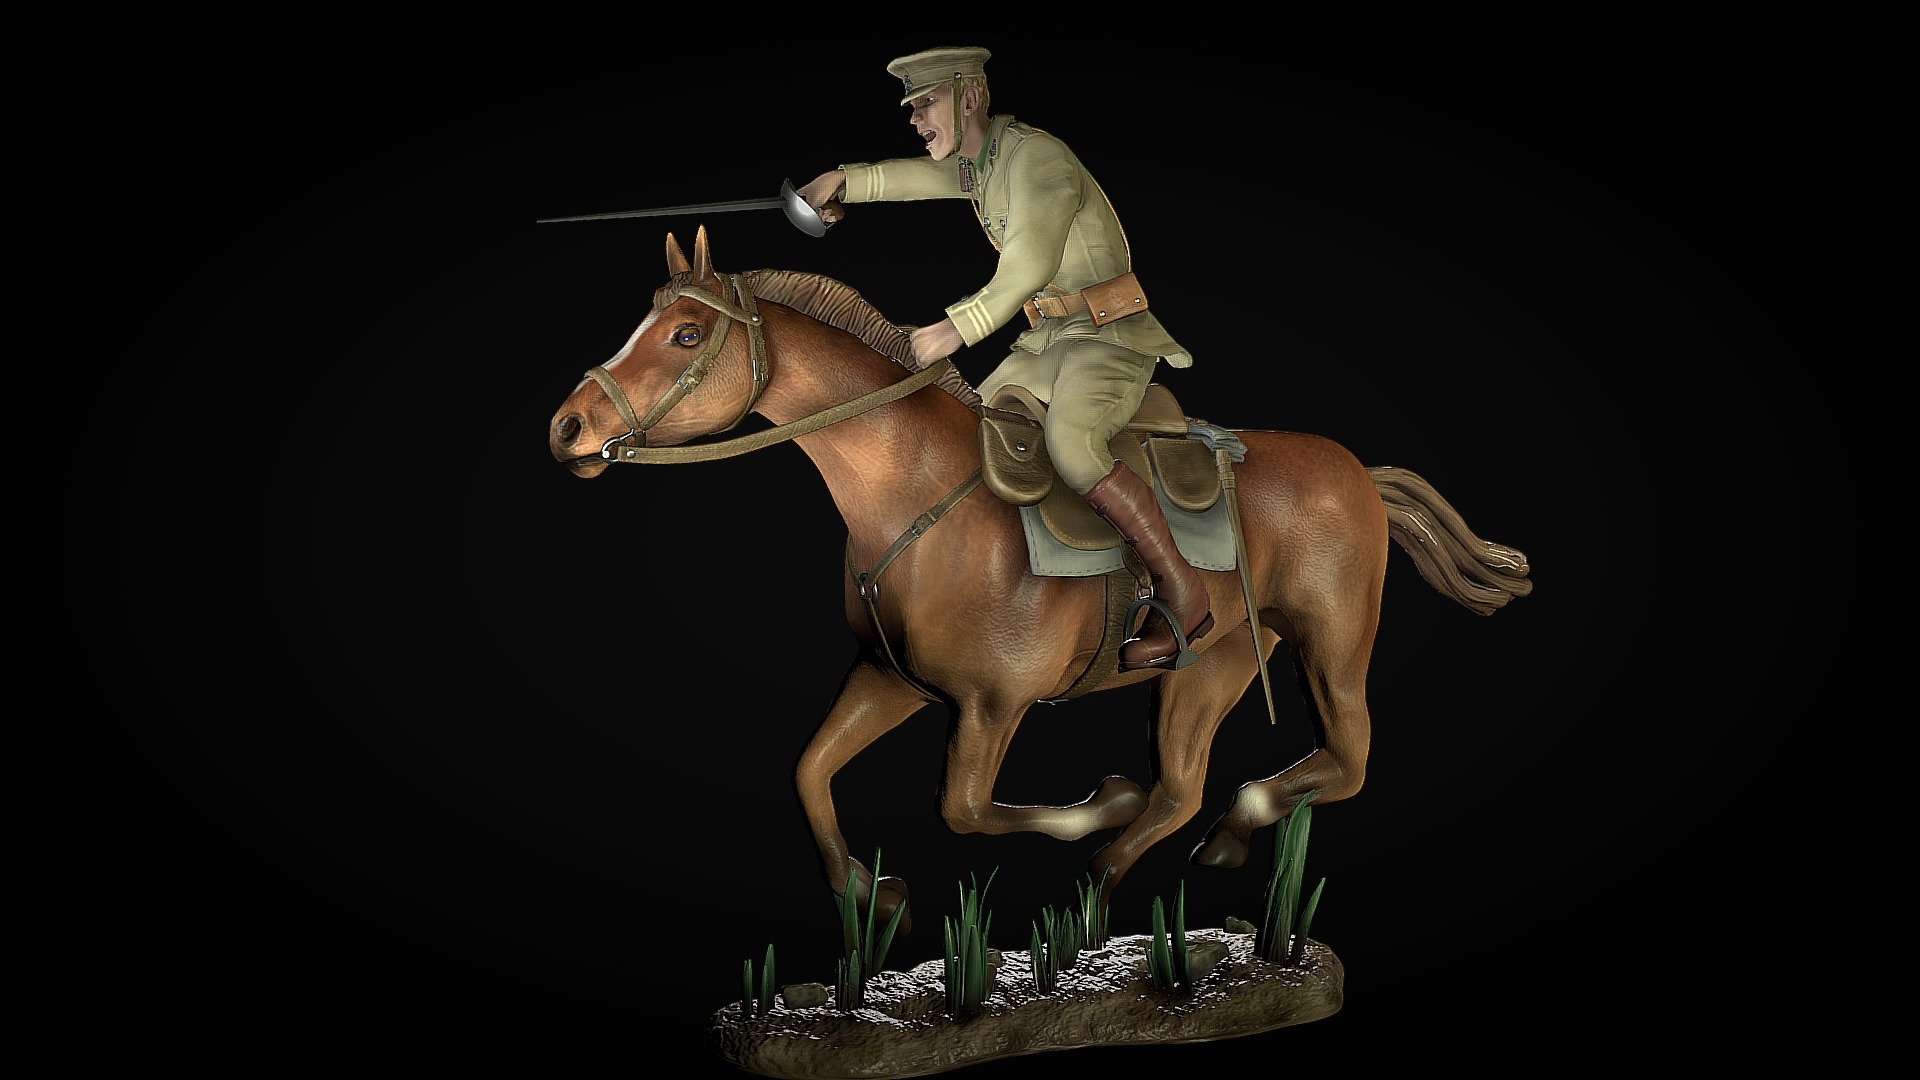 Just updated this download with a new stl file file for printing (21 June 2020) - noticed error in earlier version.
 A high-poly Zbrush model ready for 3d printing  The model depicts a British cavalry officer during a cavalry charge in WW1.  During the first world war cavalry tactics changed with an emphasis on dismounted firepower and covering fire from the flanks, using machine guns and attached artillery to support cavalry charges.  The download for this model includes the textured fbx file displayed here and an stl file ready for 3d printing - see images below.  The stl file is based on a high-poly version of the model decimated for printing.  I have hollowed out the model and thickened some of the very thin parts to help with printing.



 - Cavalry (new stl file) charge - WW1 - British - Download Free 3D model by Andy Woodhead (@Andywoodhead) 3d model